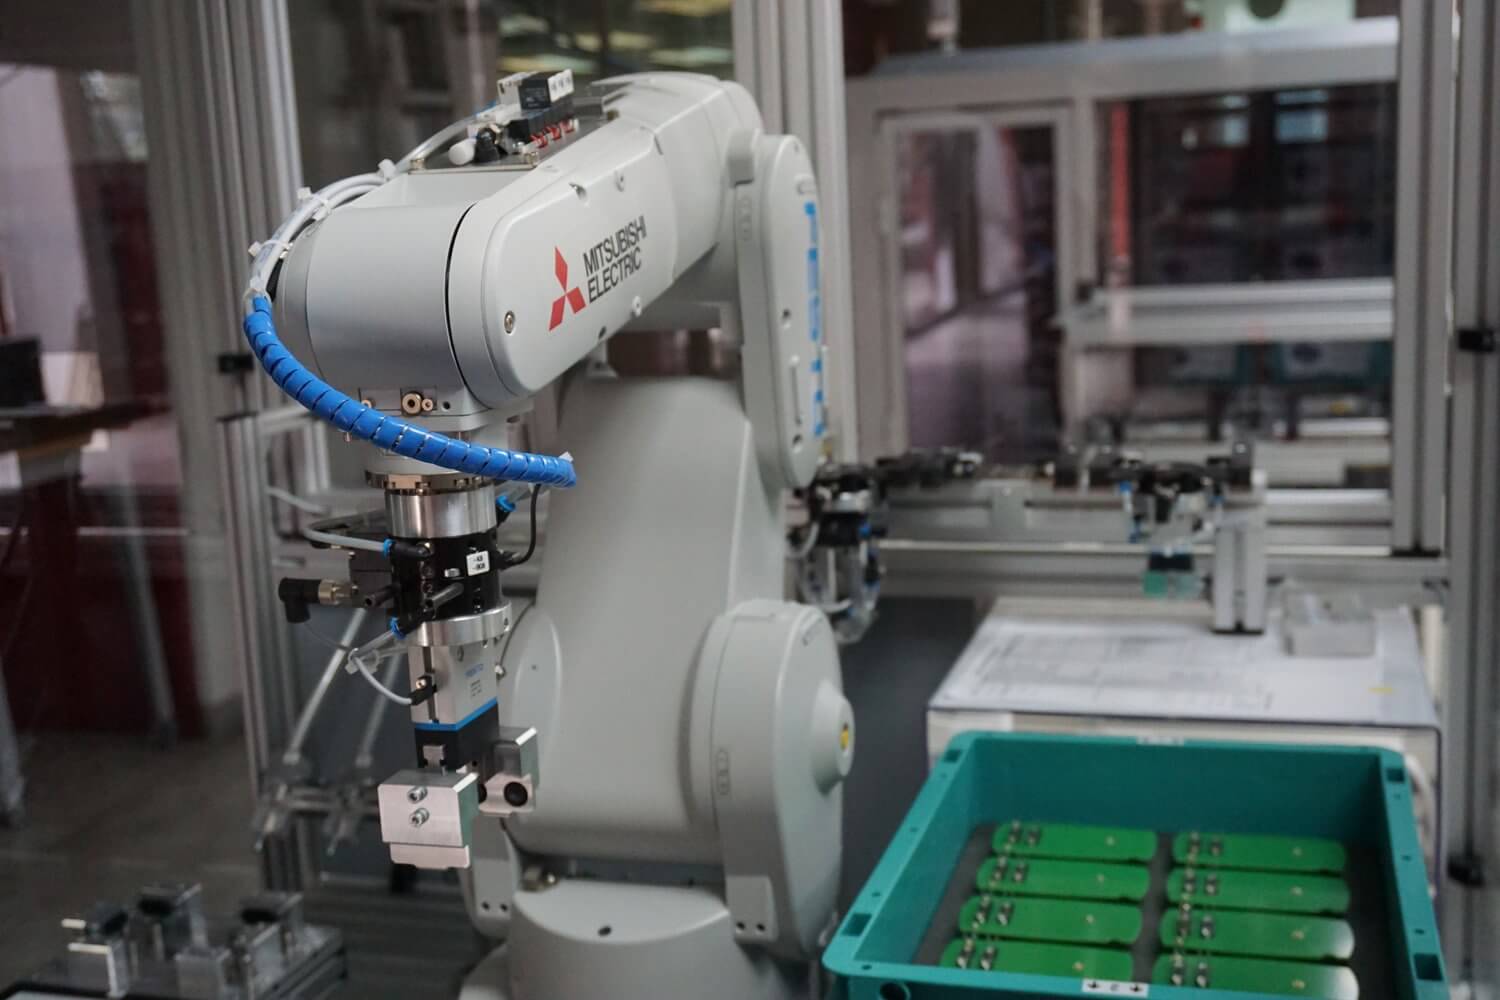 View of a Robotic end arm machine